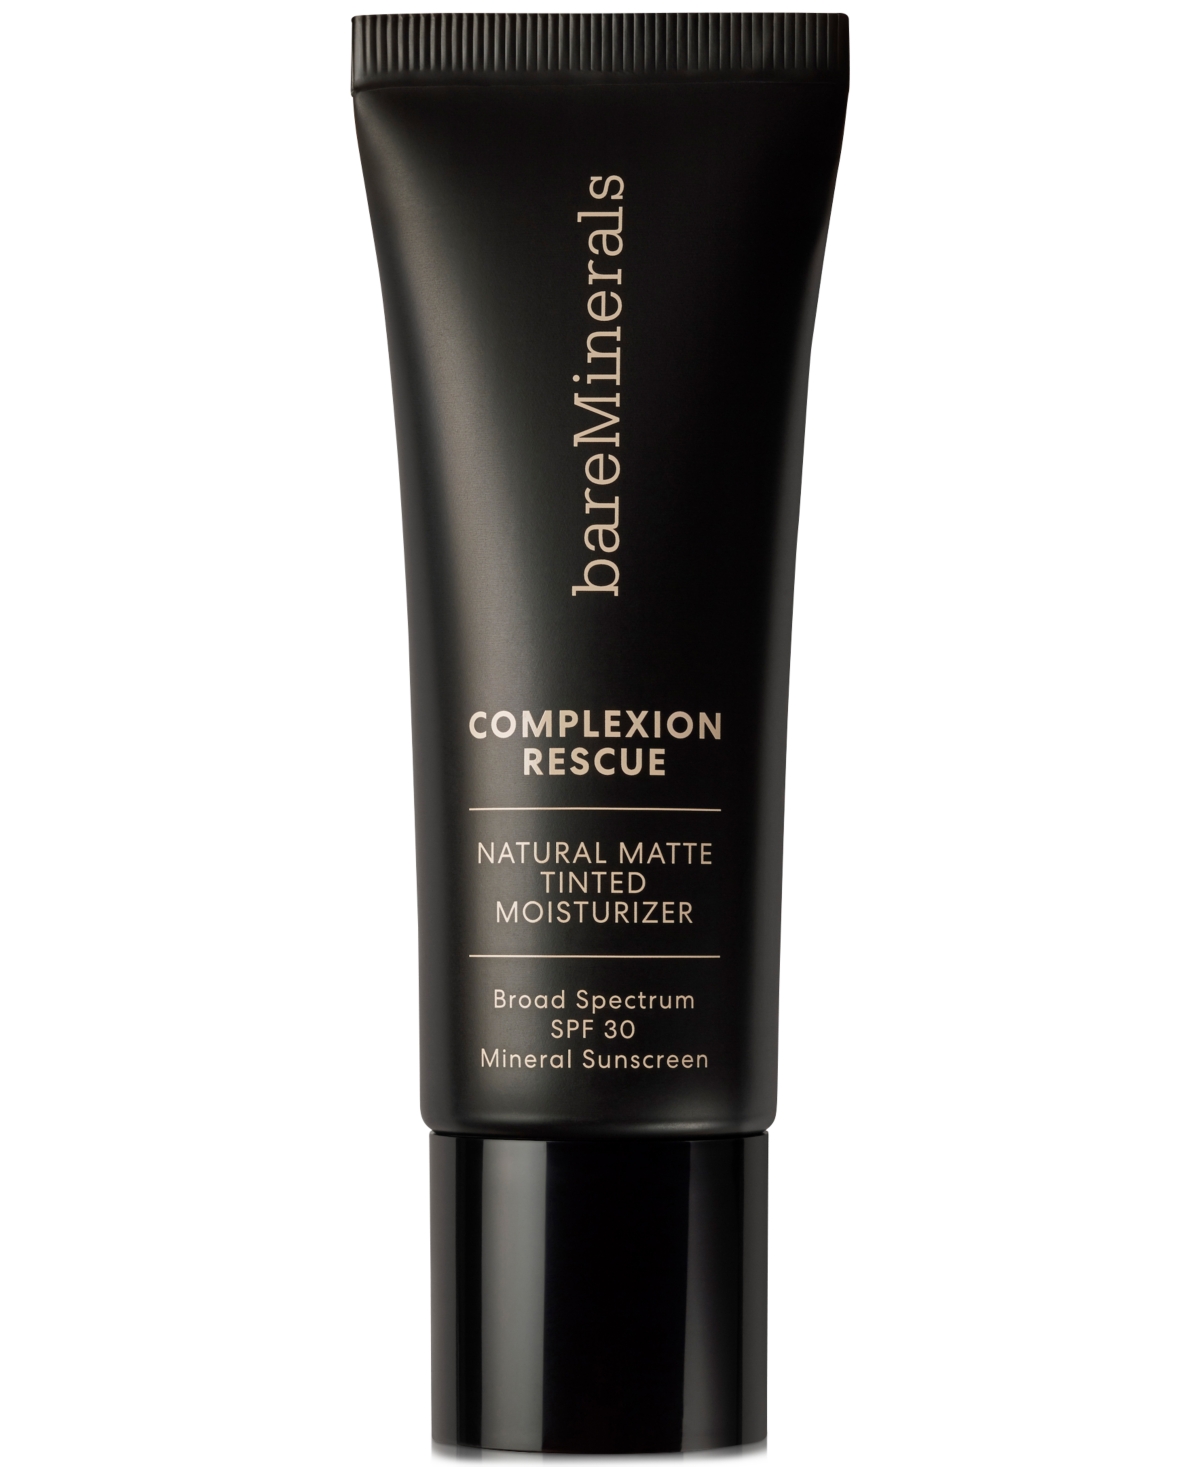 Bareminerals Complexion Rescue Natural Matte Tinted Moisturizer Spf 30 In Tan Amber